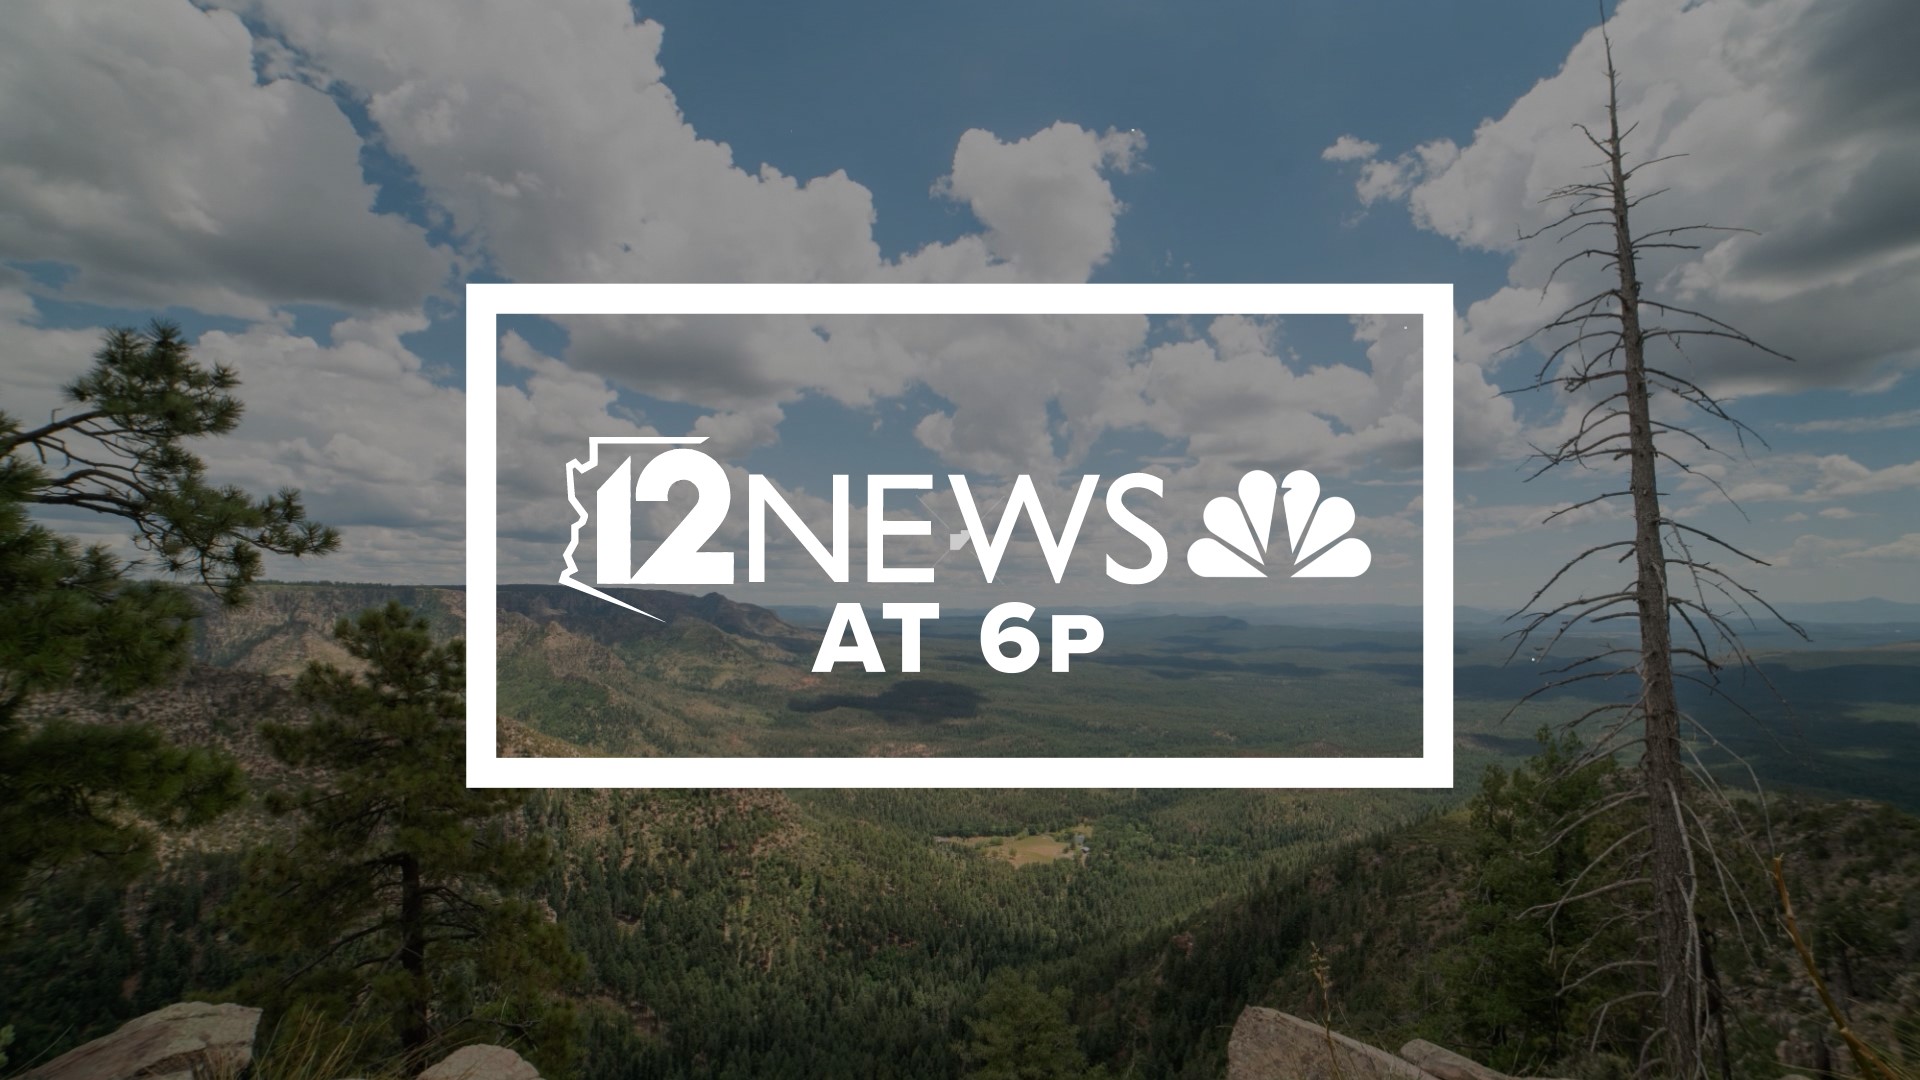 12 News at 6 delivers the day's news with insightful reporting, including the best political coverage in Arizona.